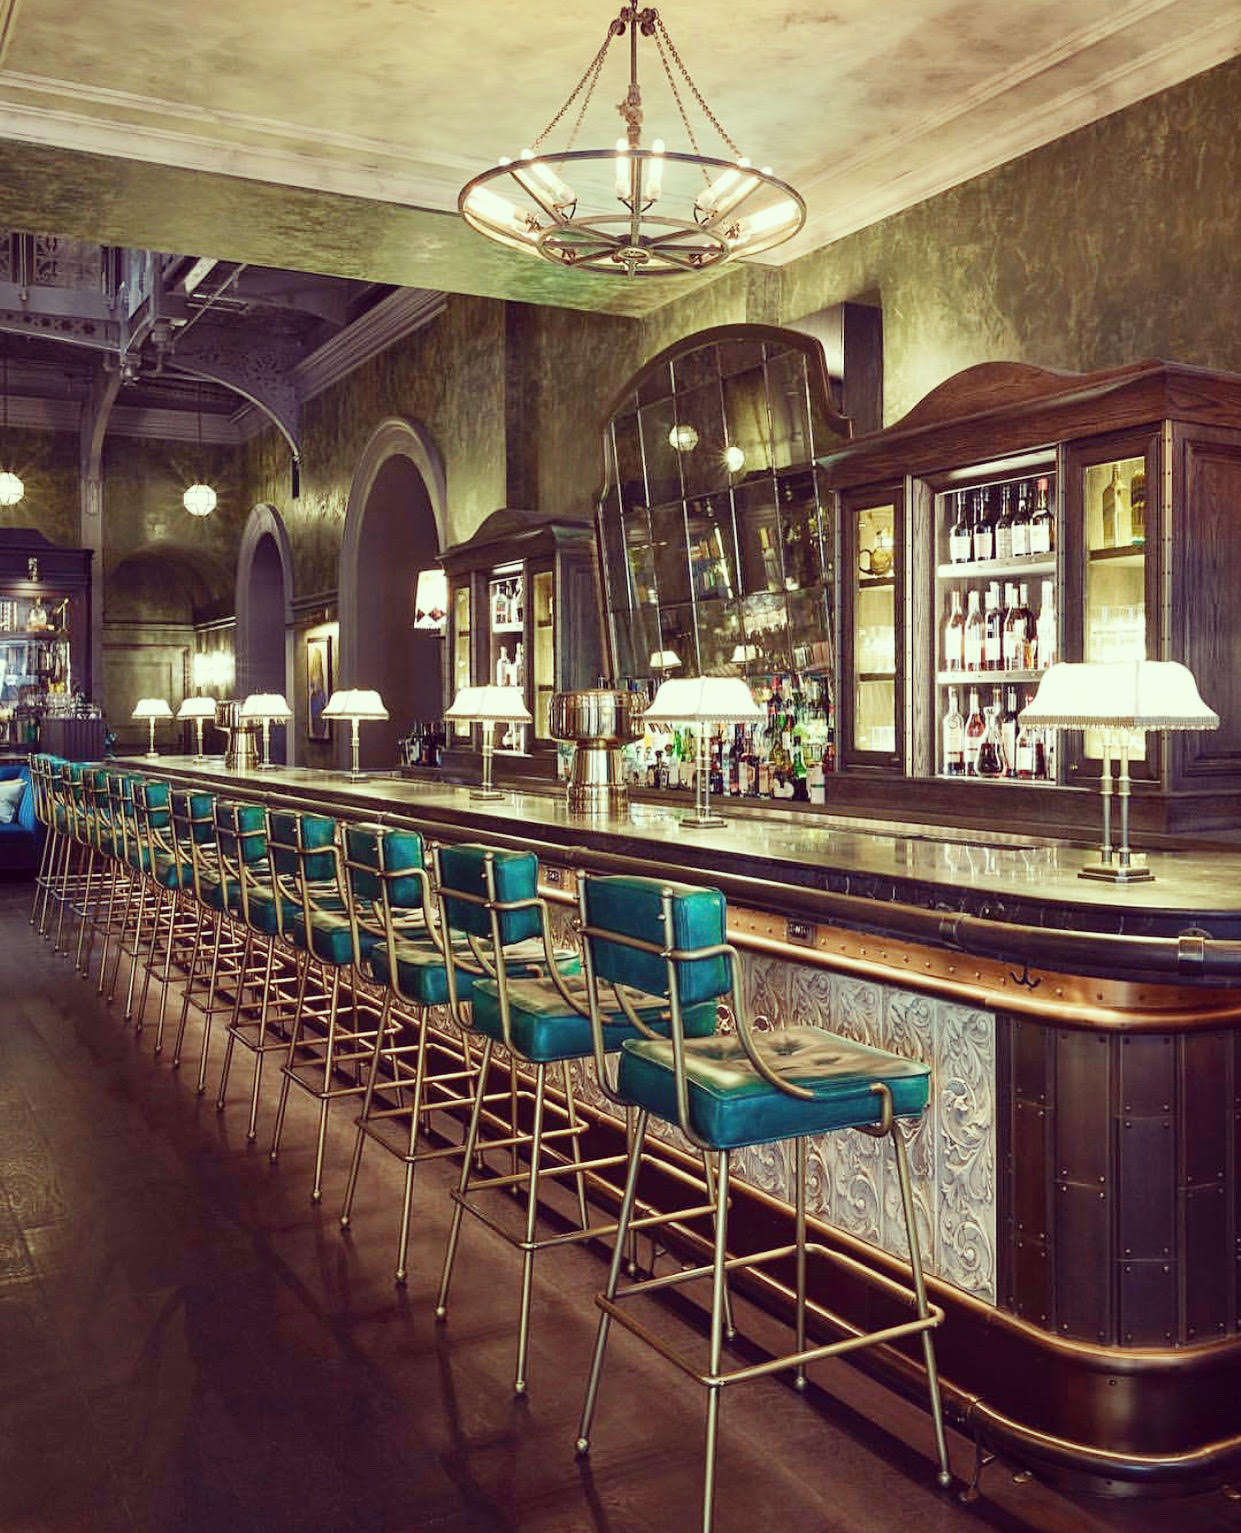 The Bar Room at Temple Court, The Beekman, New York USA MARCOBEOLCHI